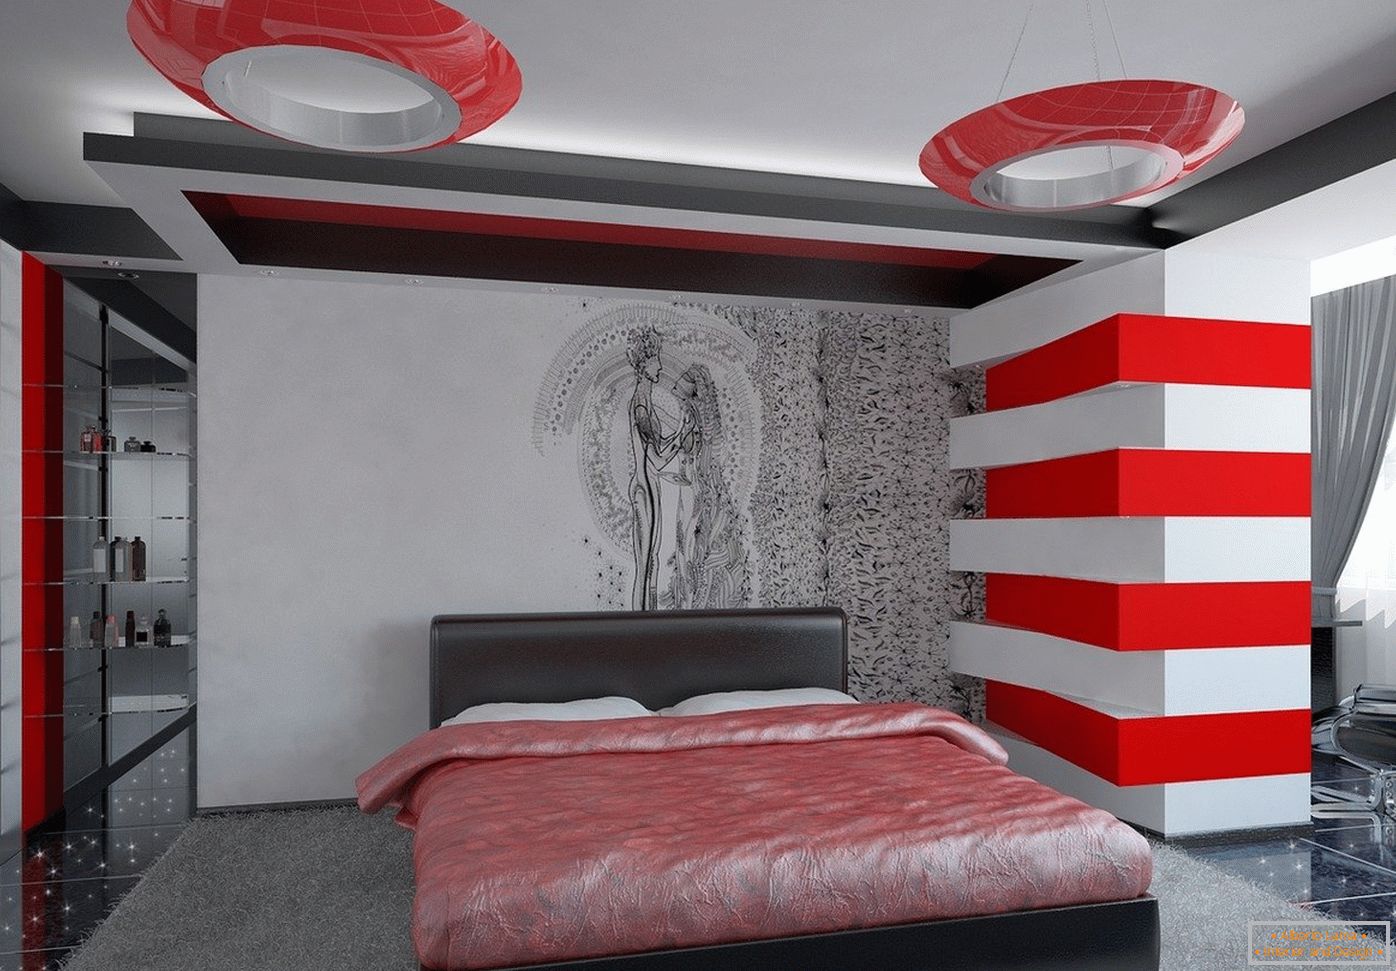 Bright colors in the interior of the bedroom in the style of high-tech